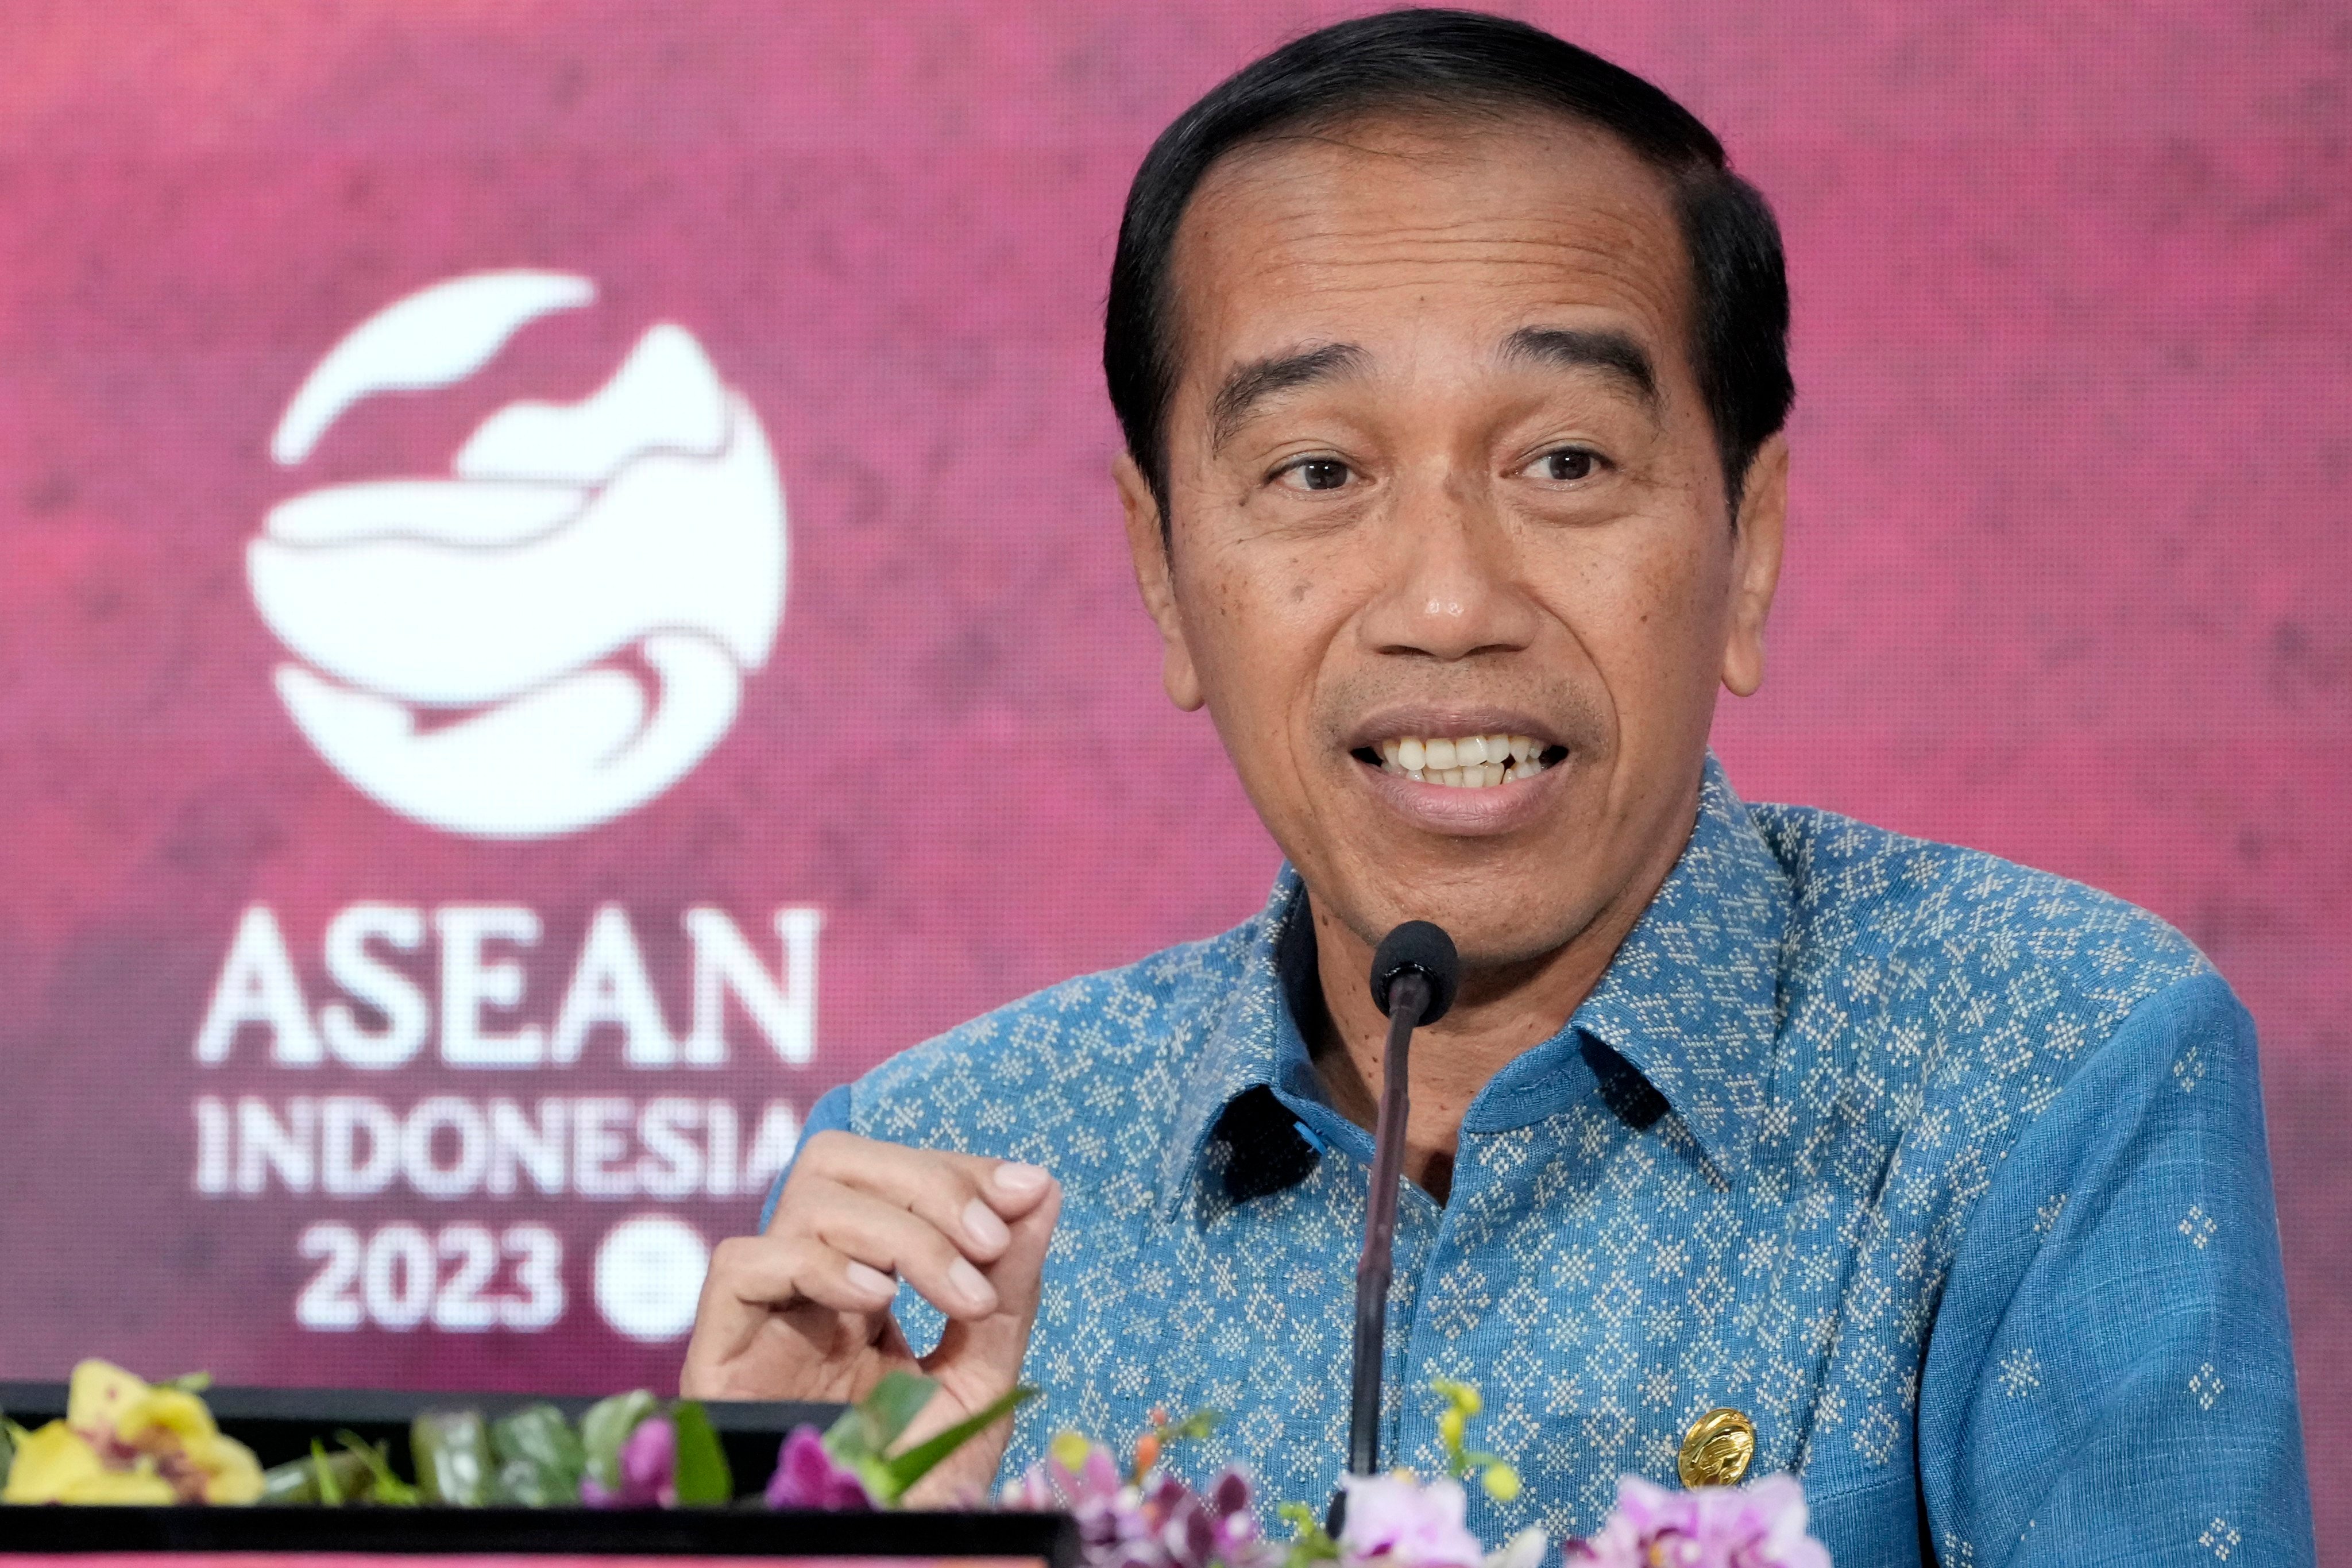 Indonesia’s President Joko Widodo speaks at a press conference at the 42nd Asean Summit in Labuan Bajo, East Nusa Tenggara, Indonesia, on May 11. Indonesia is the chair of Asean this year. Photo: EPA-EFE